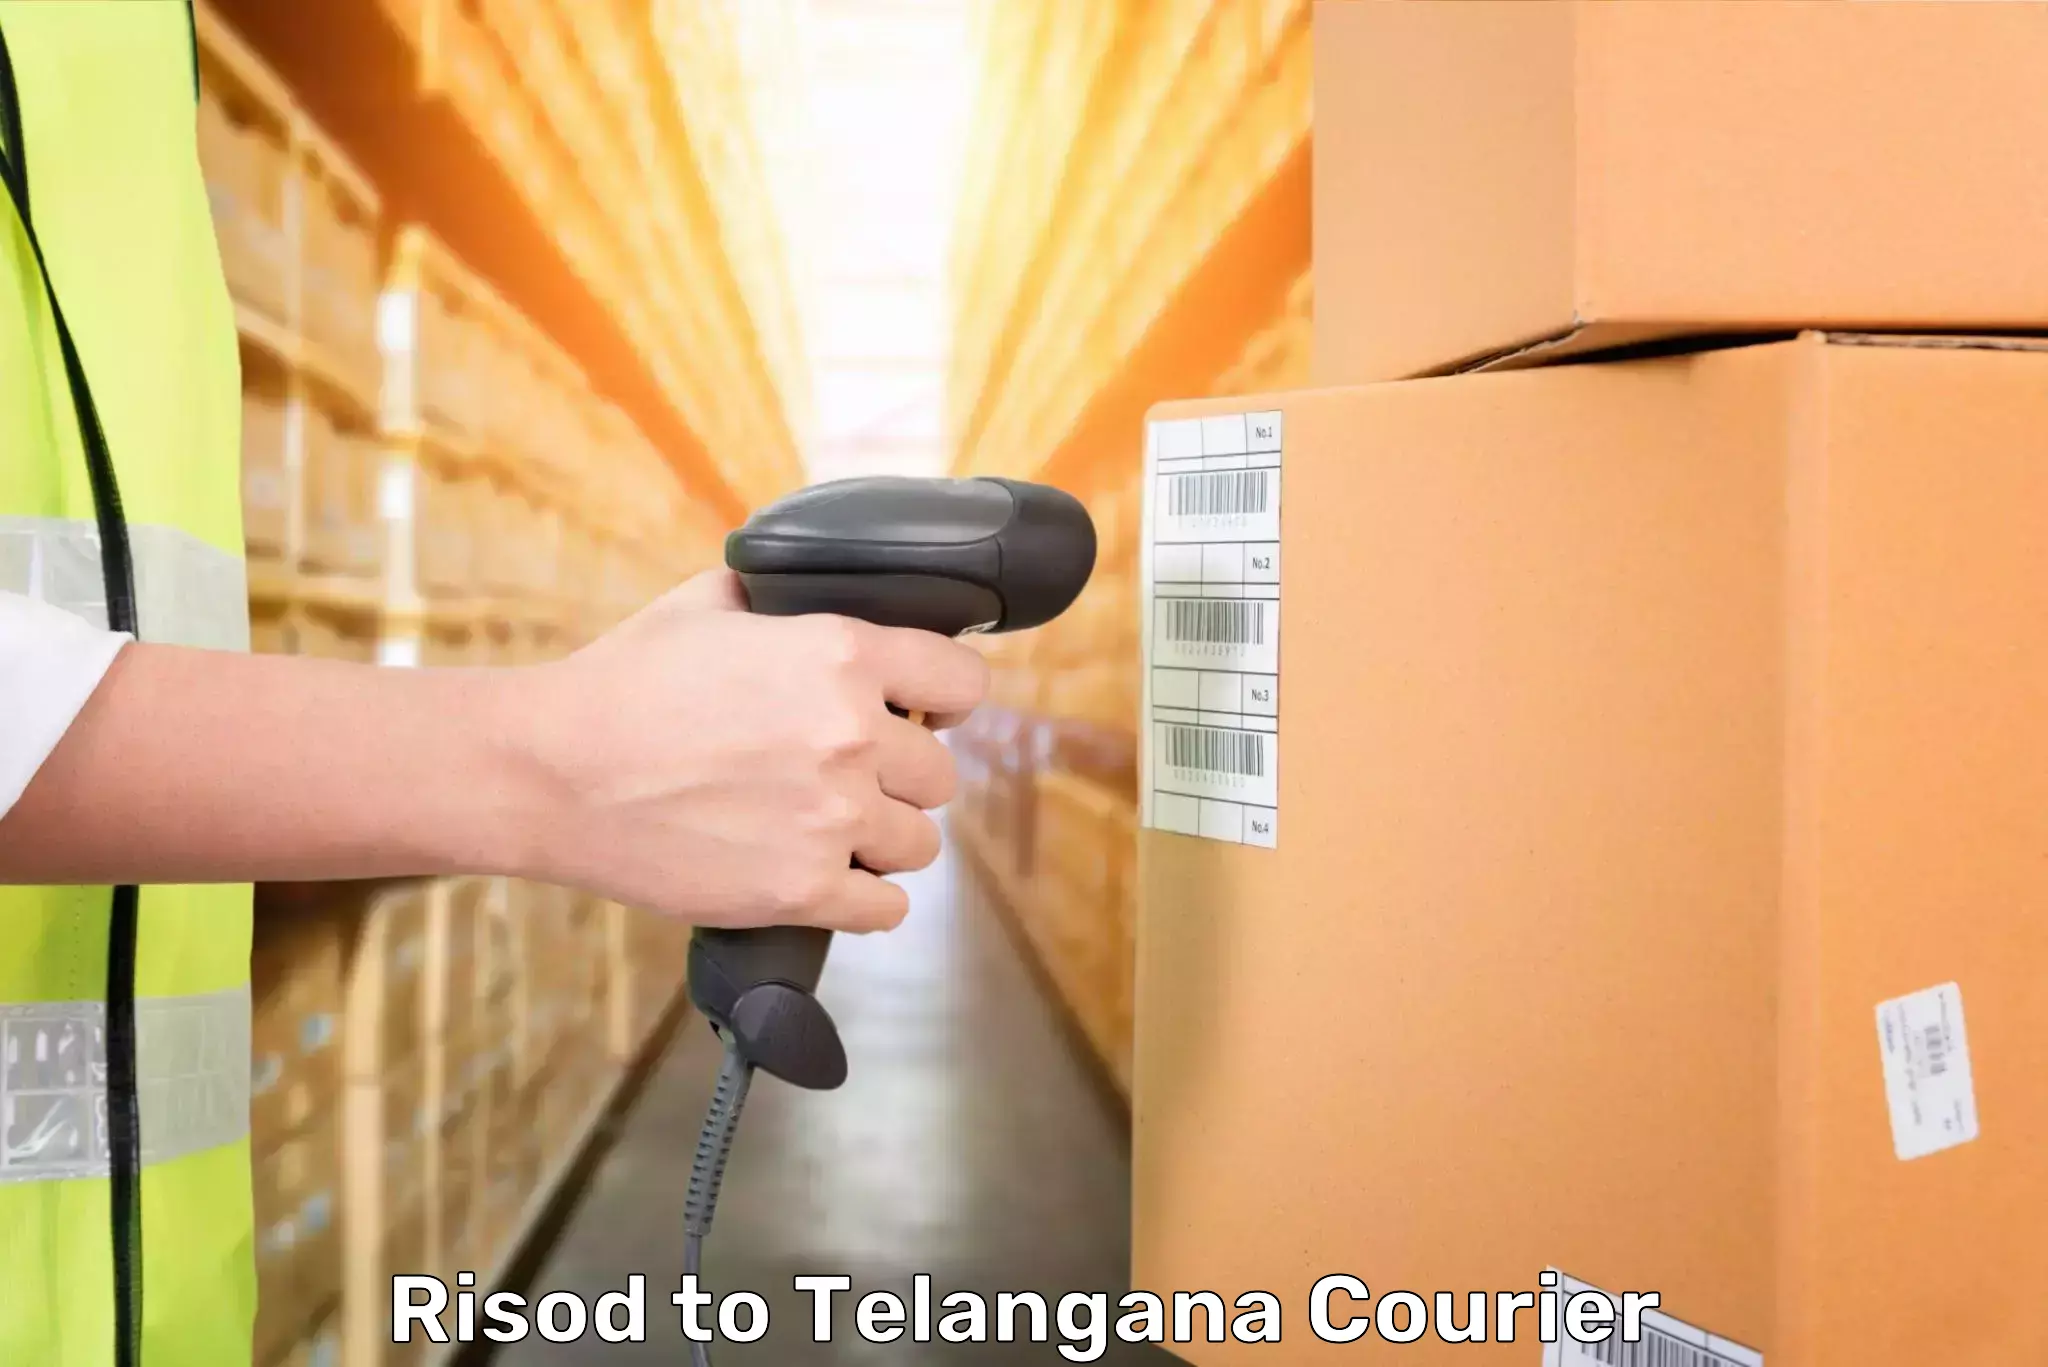 Luggage transport consultancy Risod to Telangana